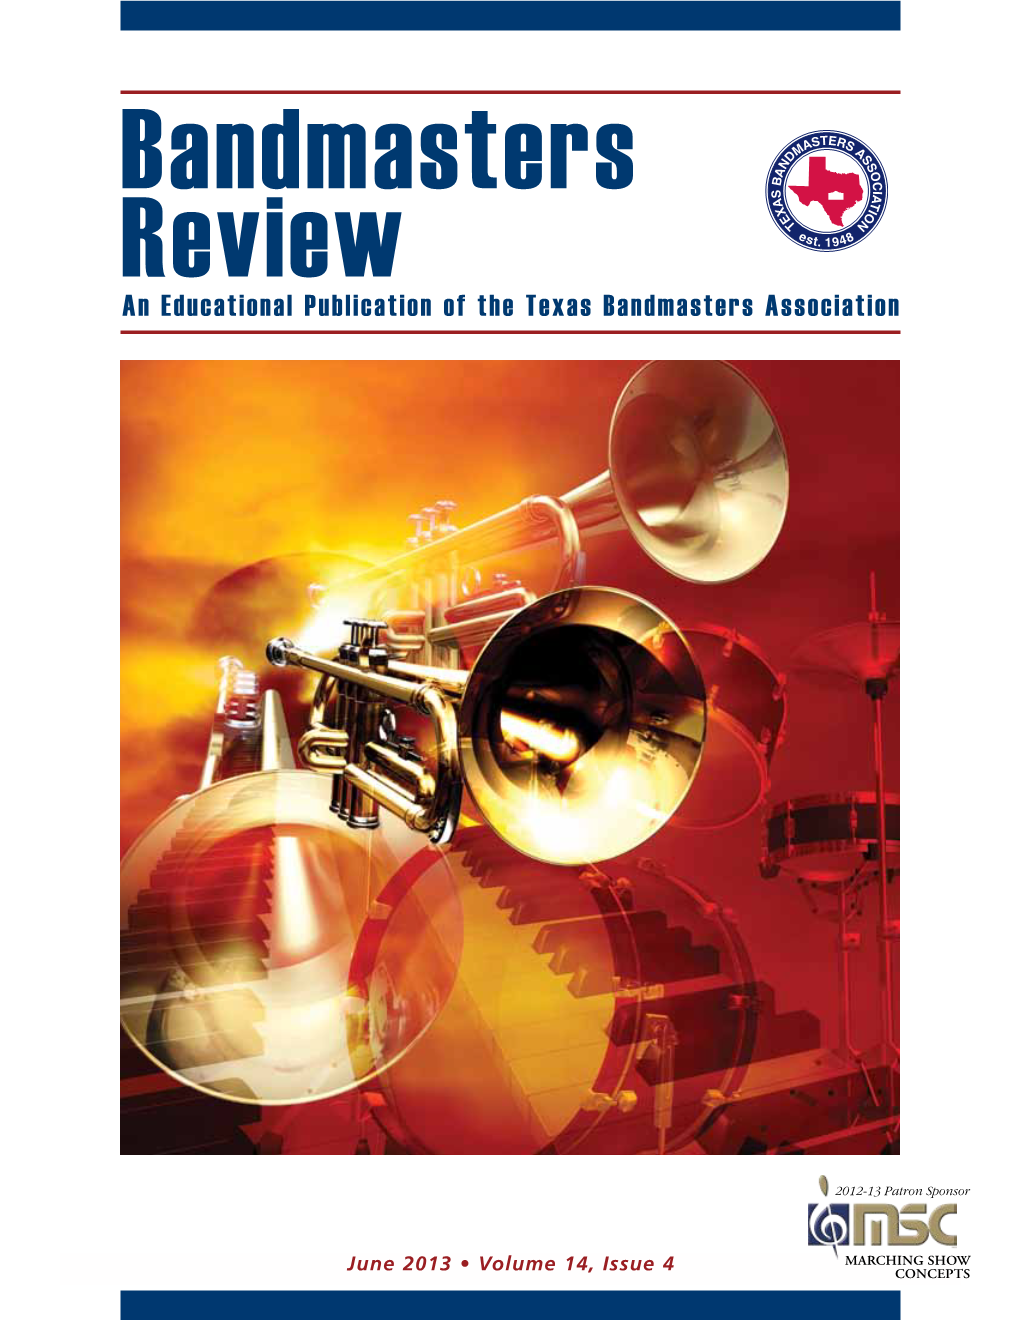 An Educational Publication of the Texas Bandmasters Association